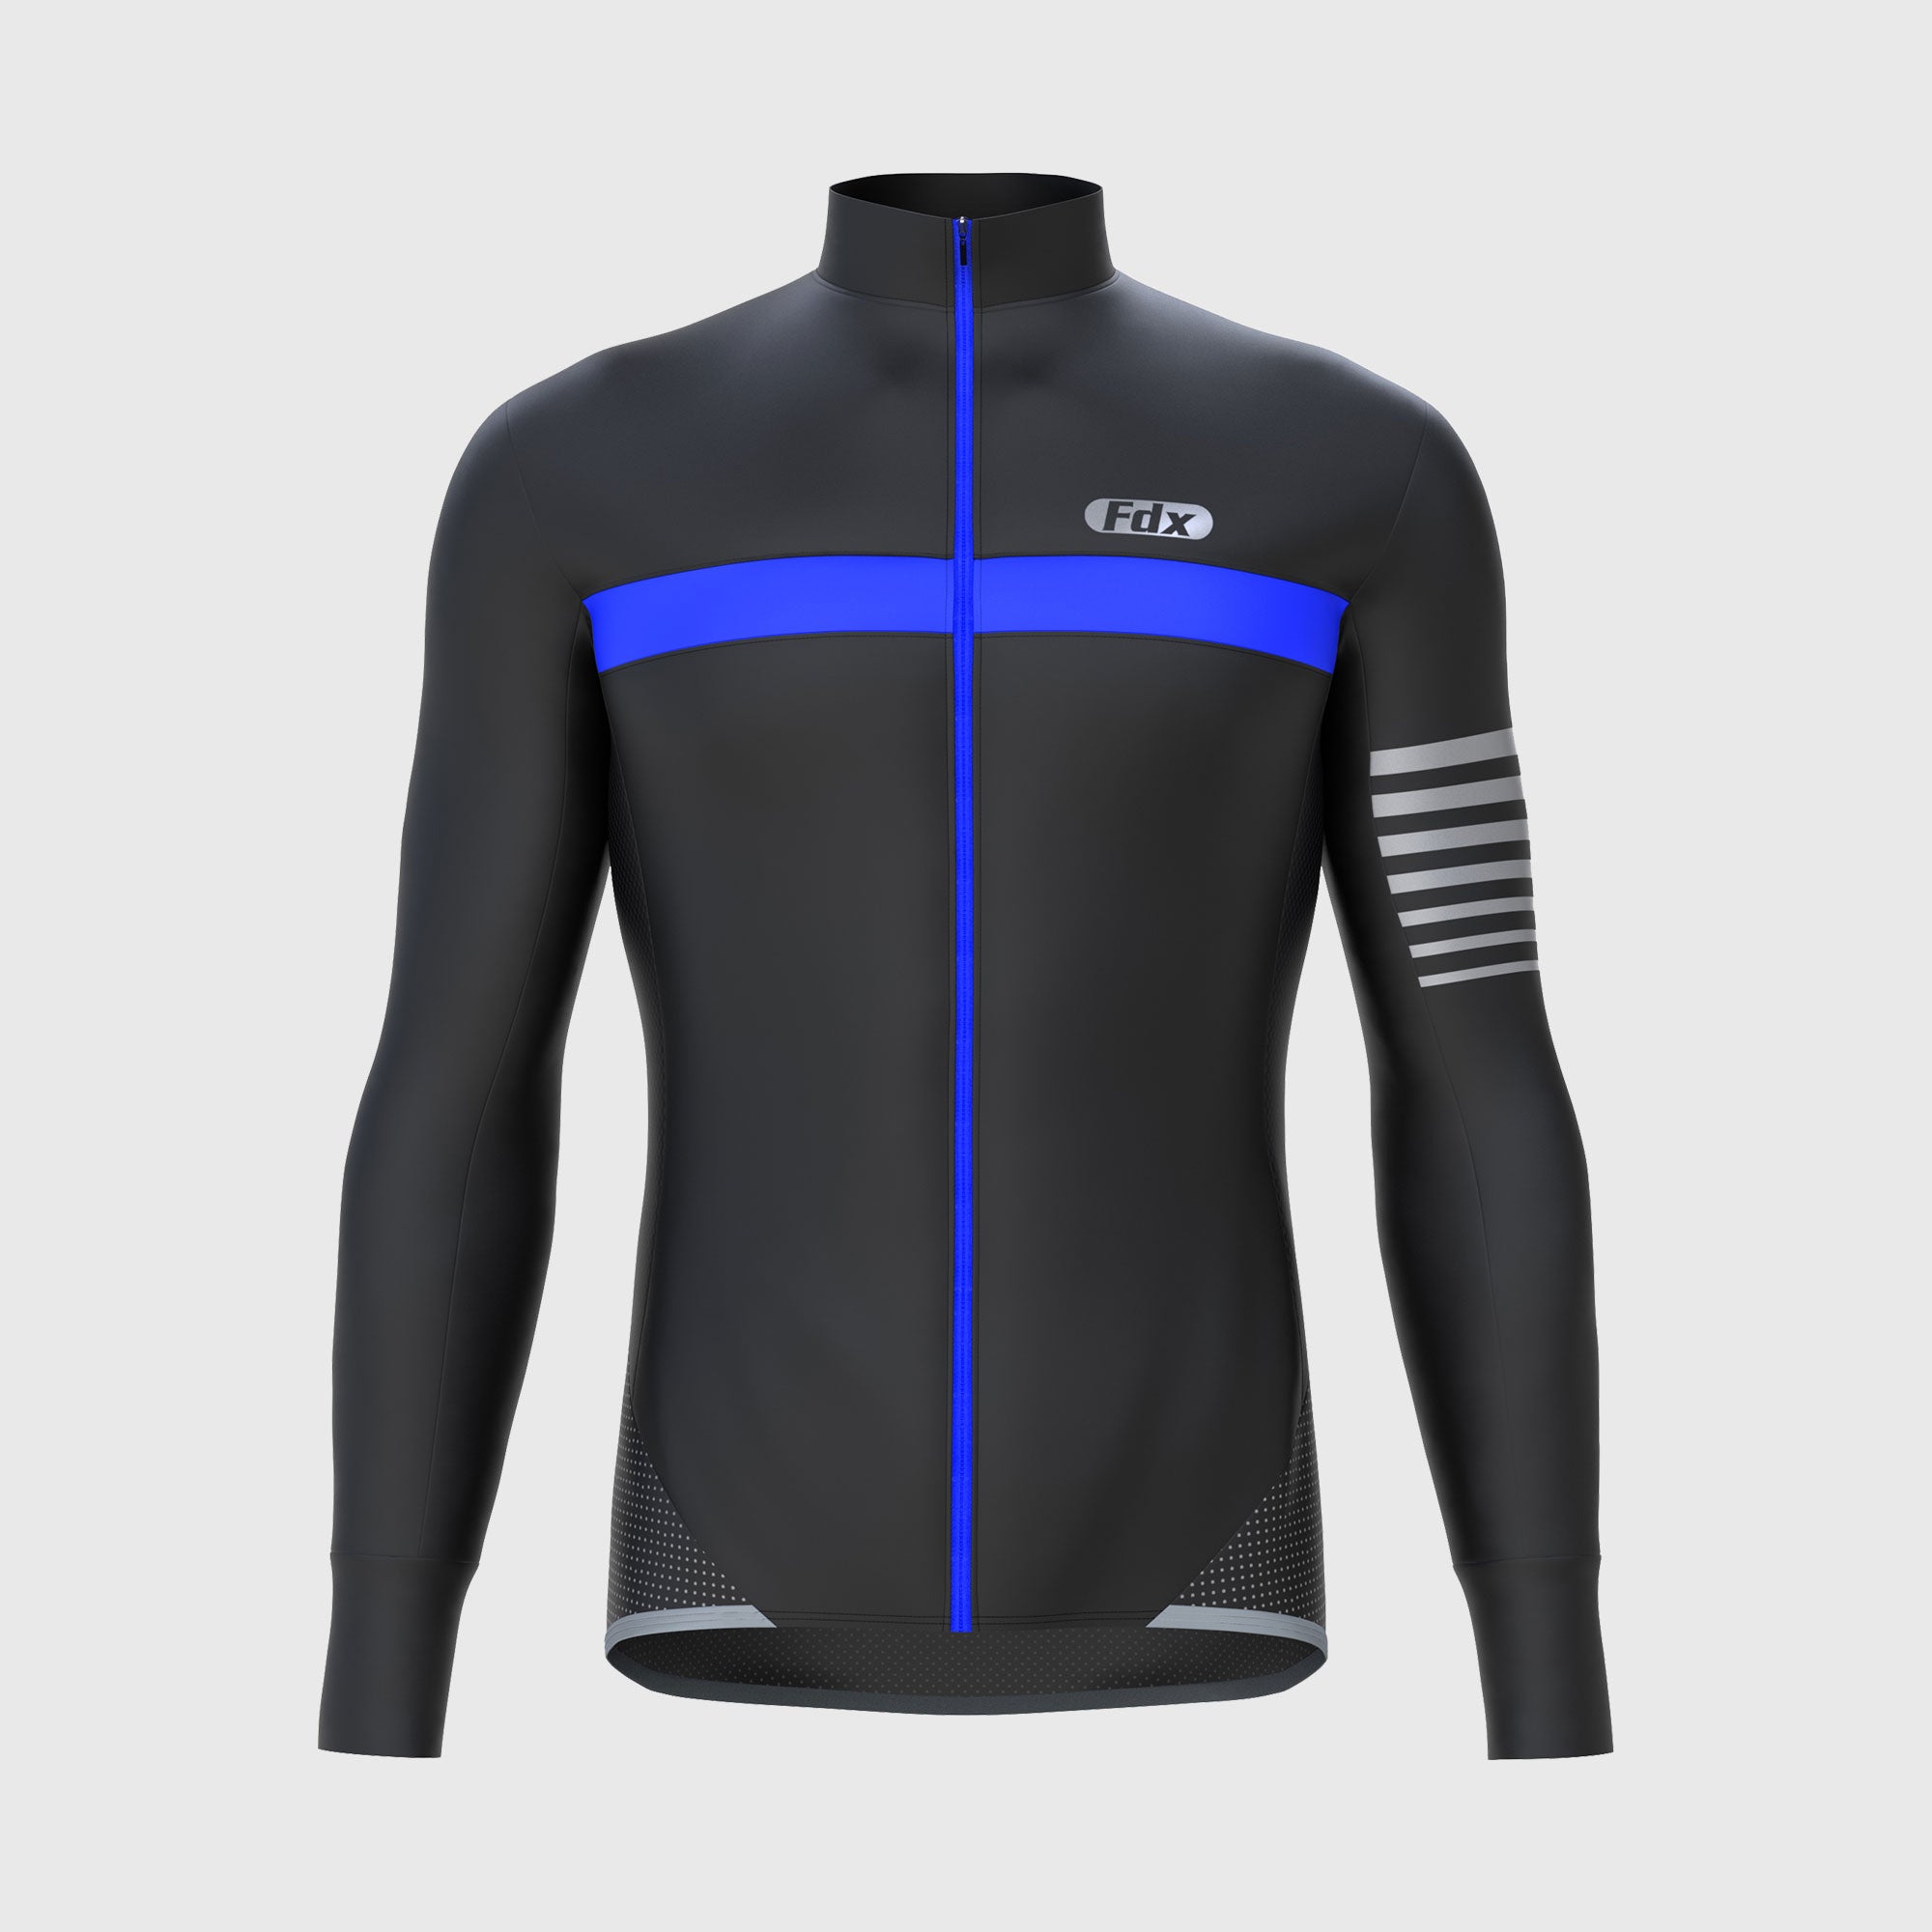 Fdx All Day Men's Blue Thermal Roubaix Long Sleeve Cycling Jersey